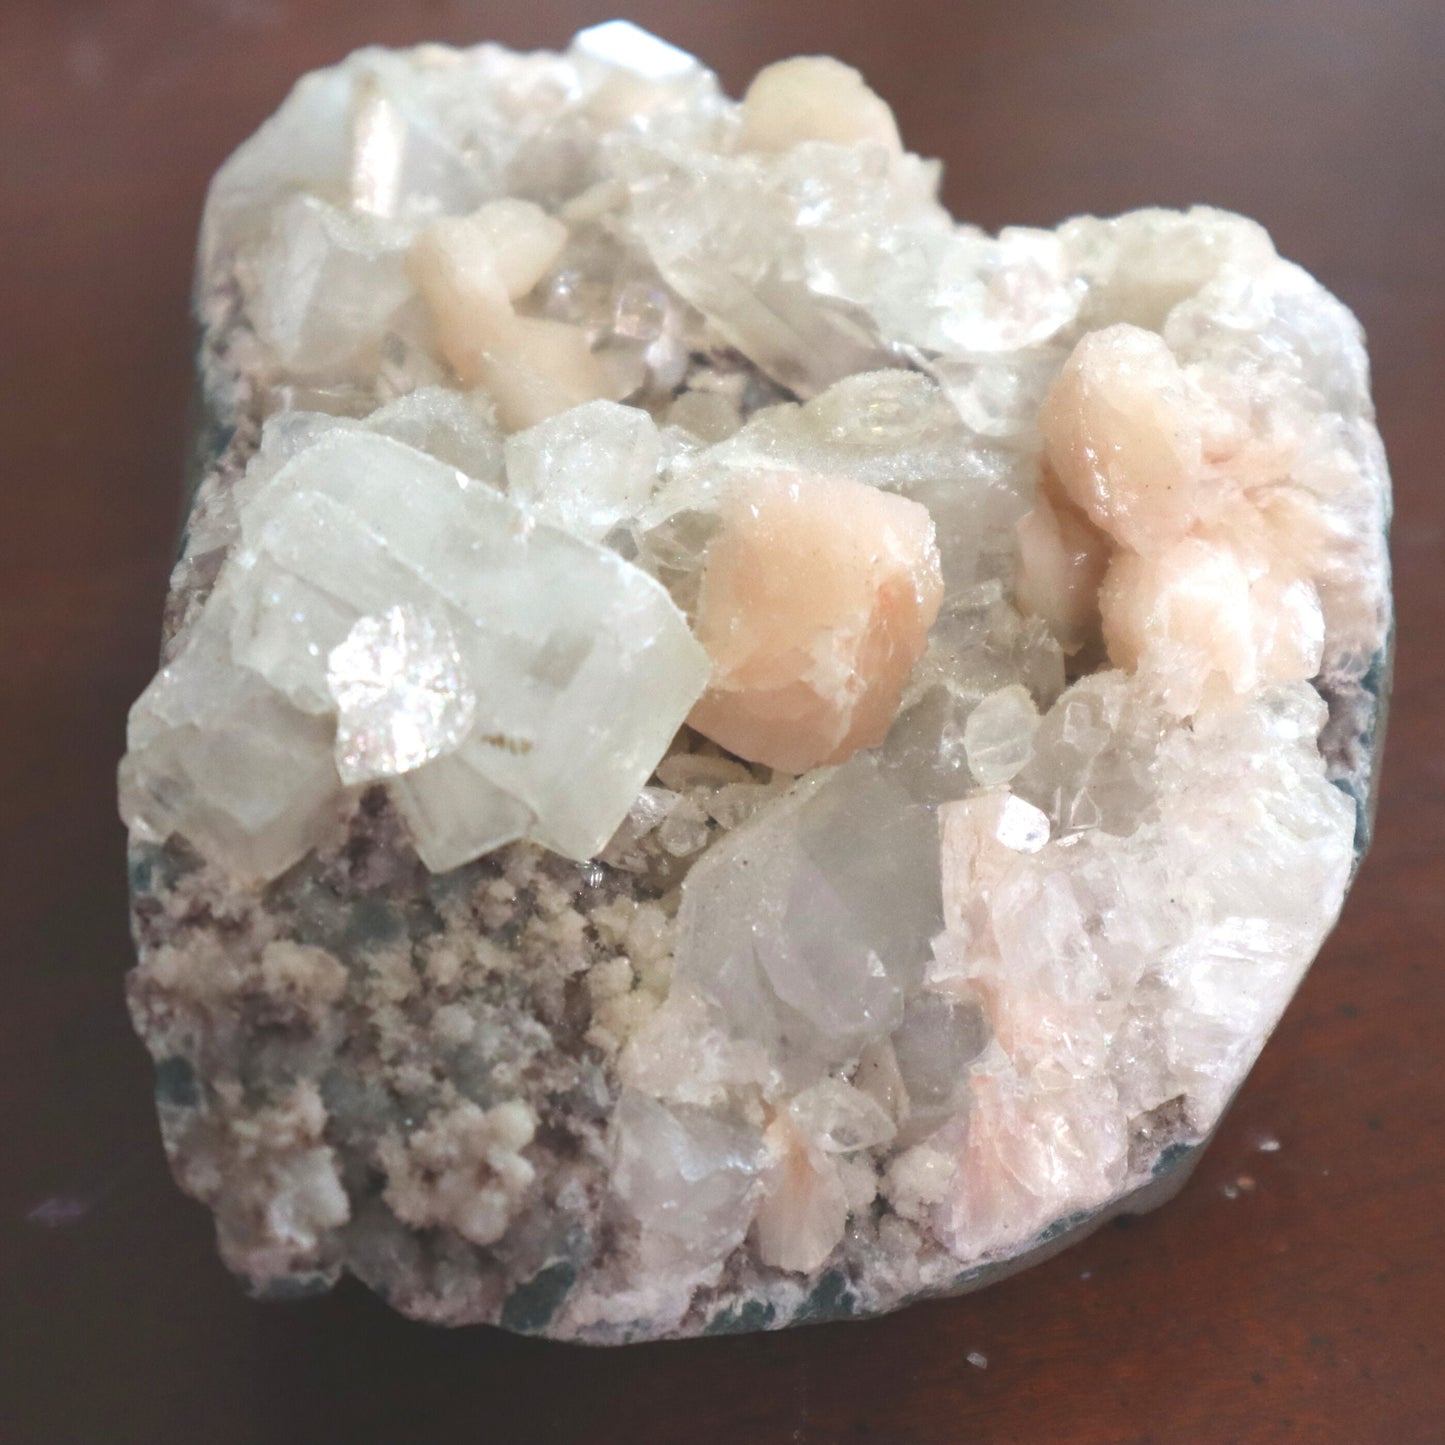 Water Diamond Apophyllite and Stilbite, Peach Apophyllite Crystal Cluster, Crystal Collection Statement Piece, Crystal Healing, Raw Crystal